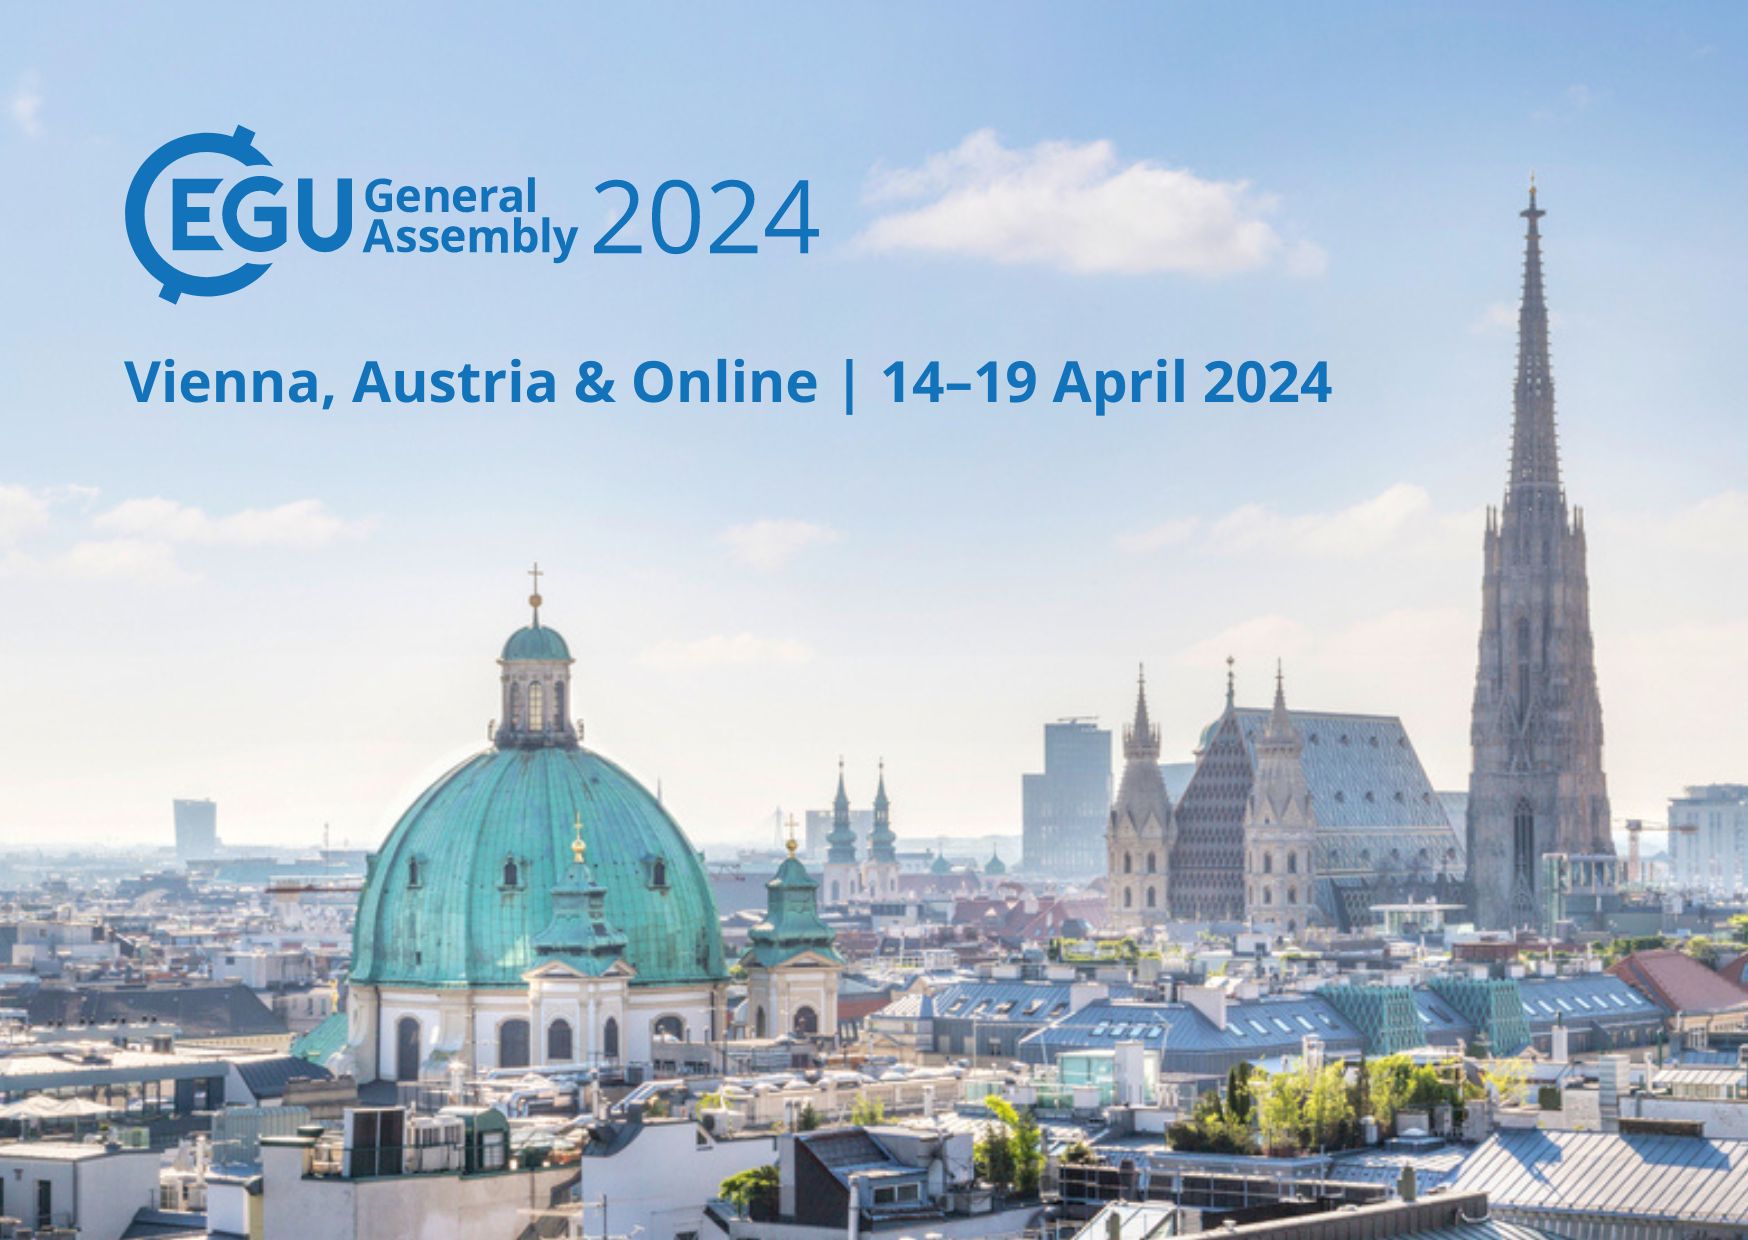 Skyline of Vienna with logo of EGU General Assembly 2024 and dates of the event